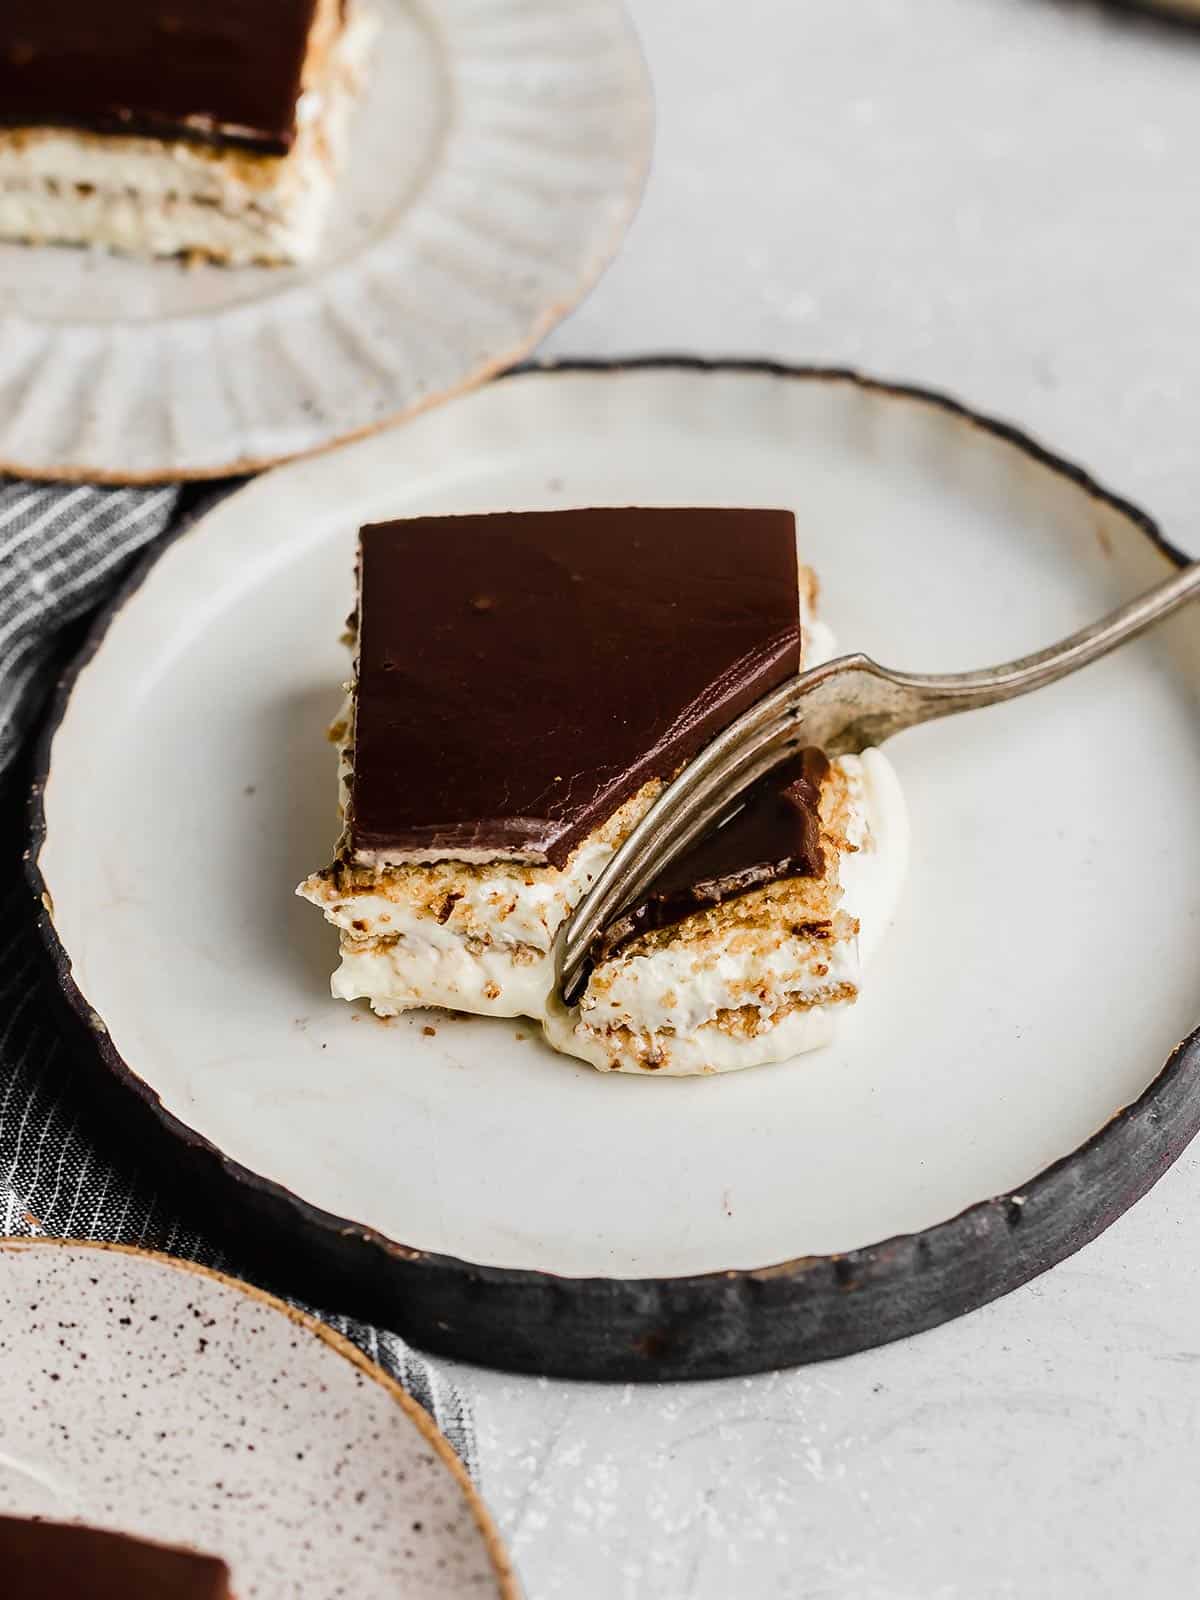 A square slice of Chocolate Eclair Cake on a black rimmed white plate.